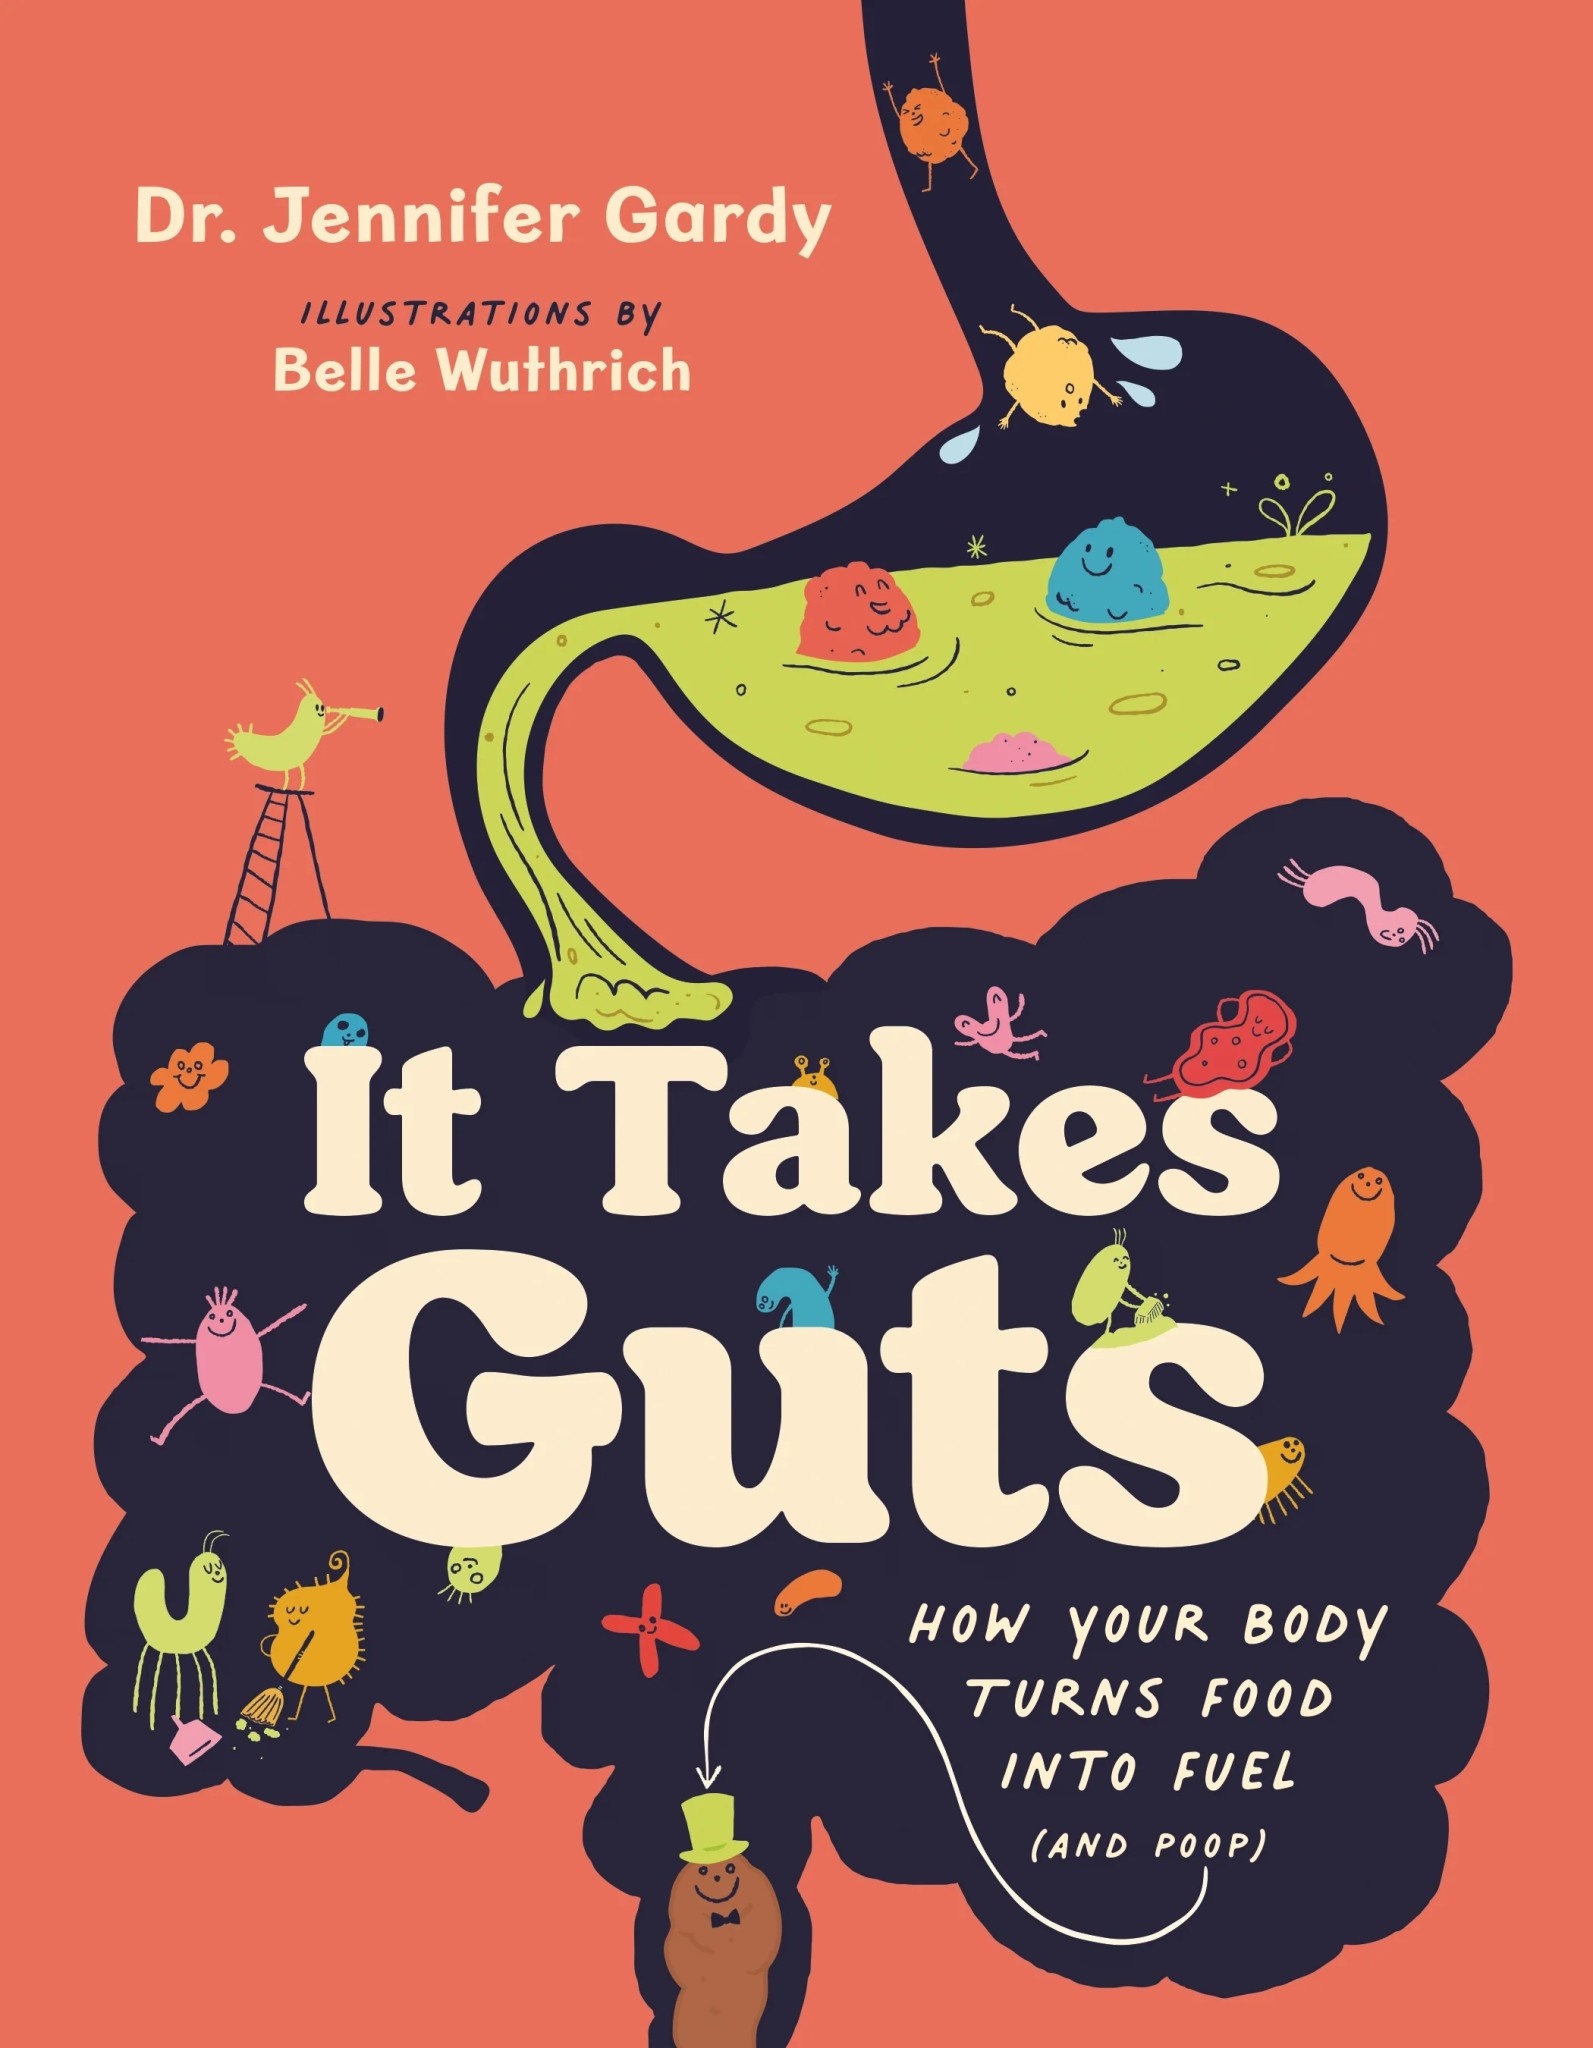 It Takes Guts: How Your Body Turns Food into Fuel (and poop) by Dr. Jennifer Gardy (ages 9-13)